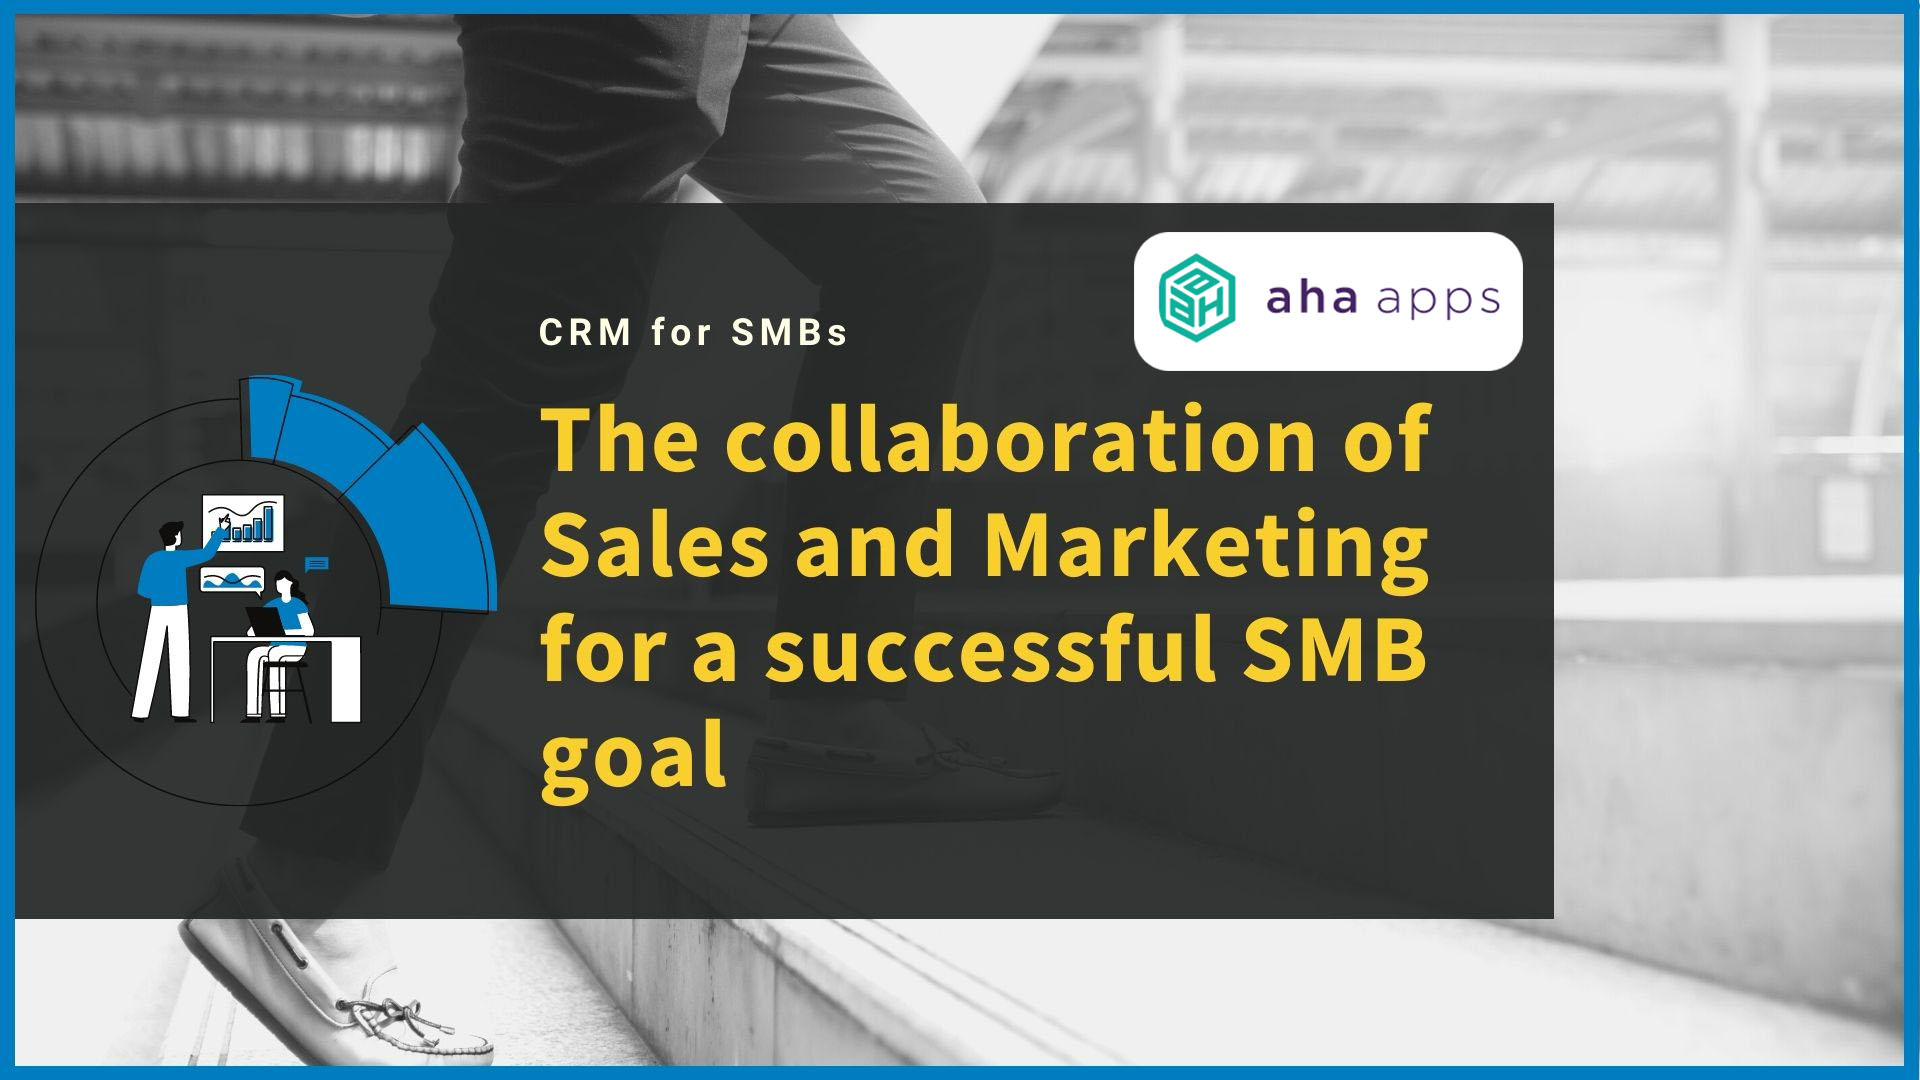 The Collaboration of Sales and Marketing for a Successful SMB Goal - AhaApps